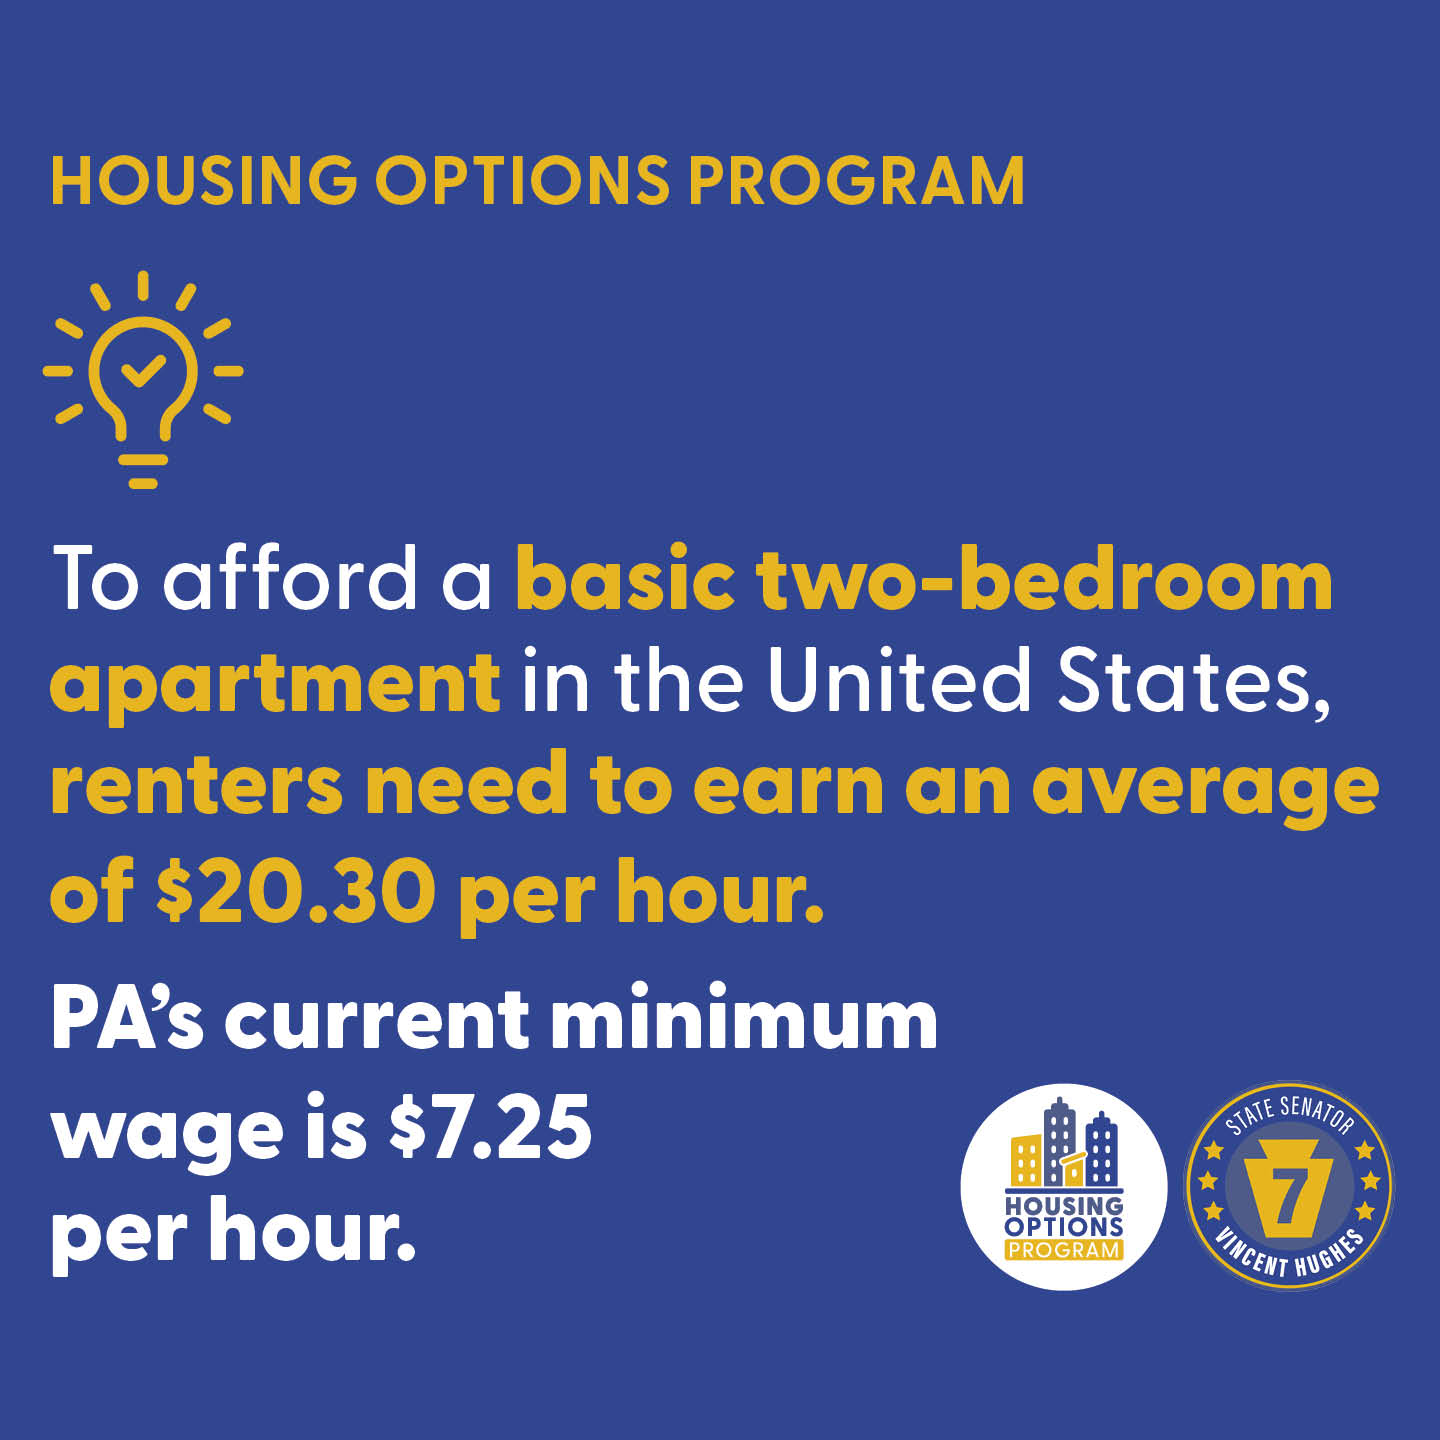 HOUSING OPTIONS PROGRAM - To afford a basic two-bedroom apartment in the United States, renters need to earn an average of $20.30 per hour. PA’s current minimum wage is $7.25 per hour.